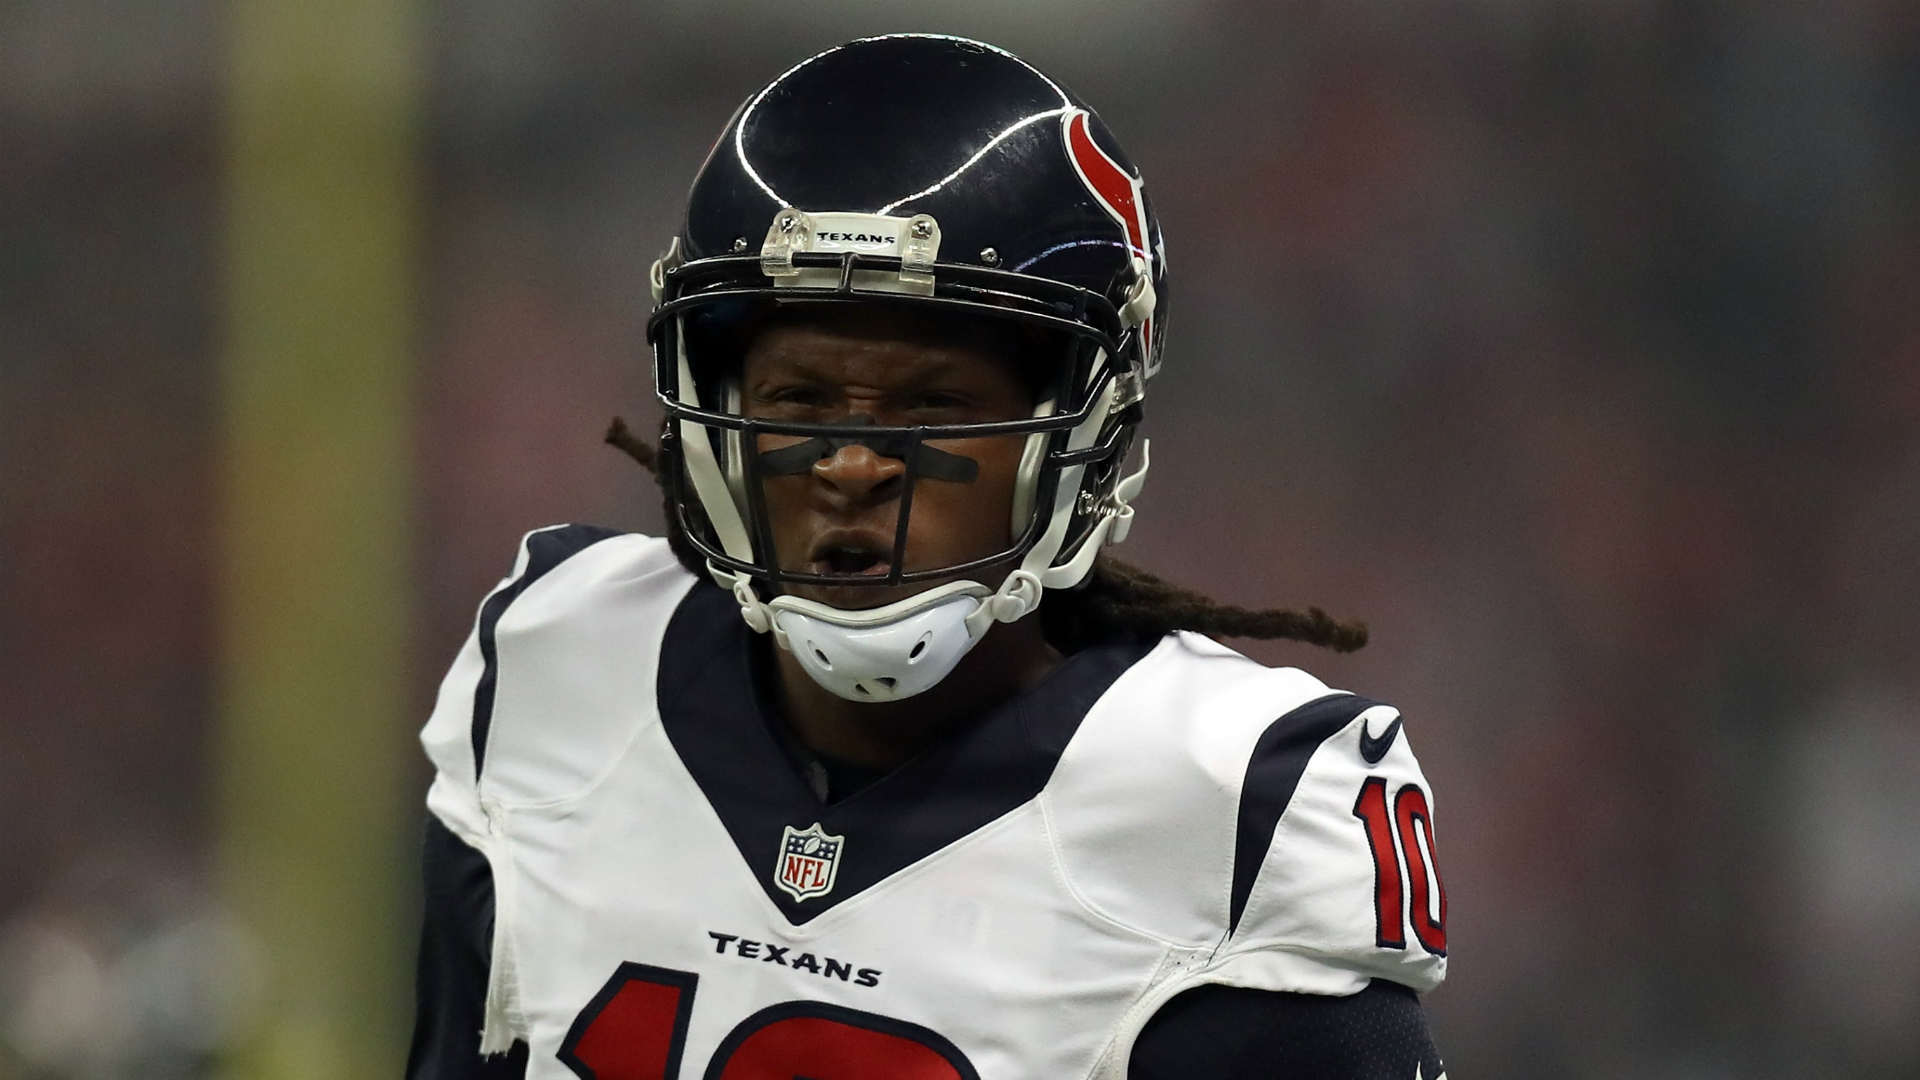 DeAndre Hopkins will donate NFL playoff check to slain 7-year-old Jazmine Barnes' family